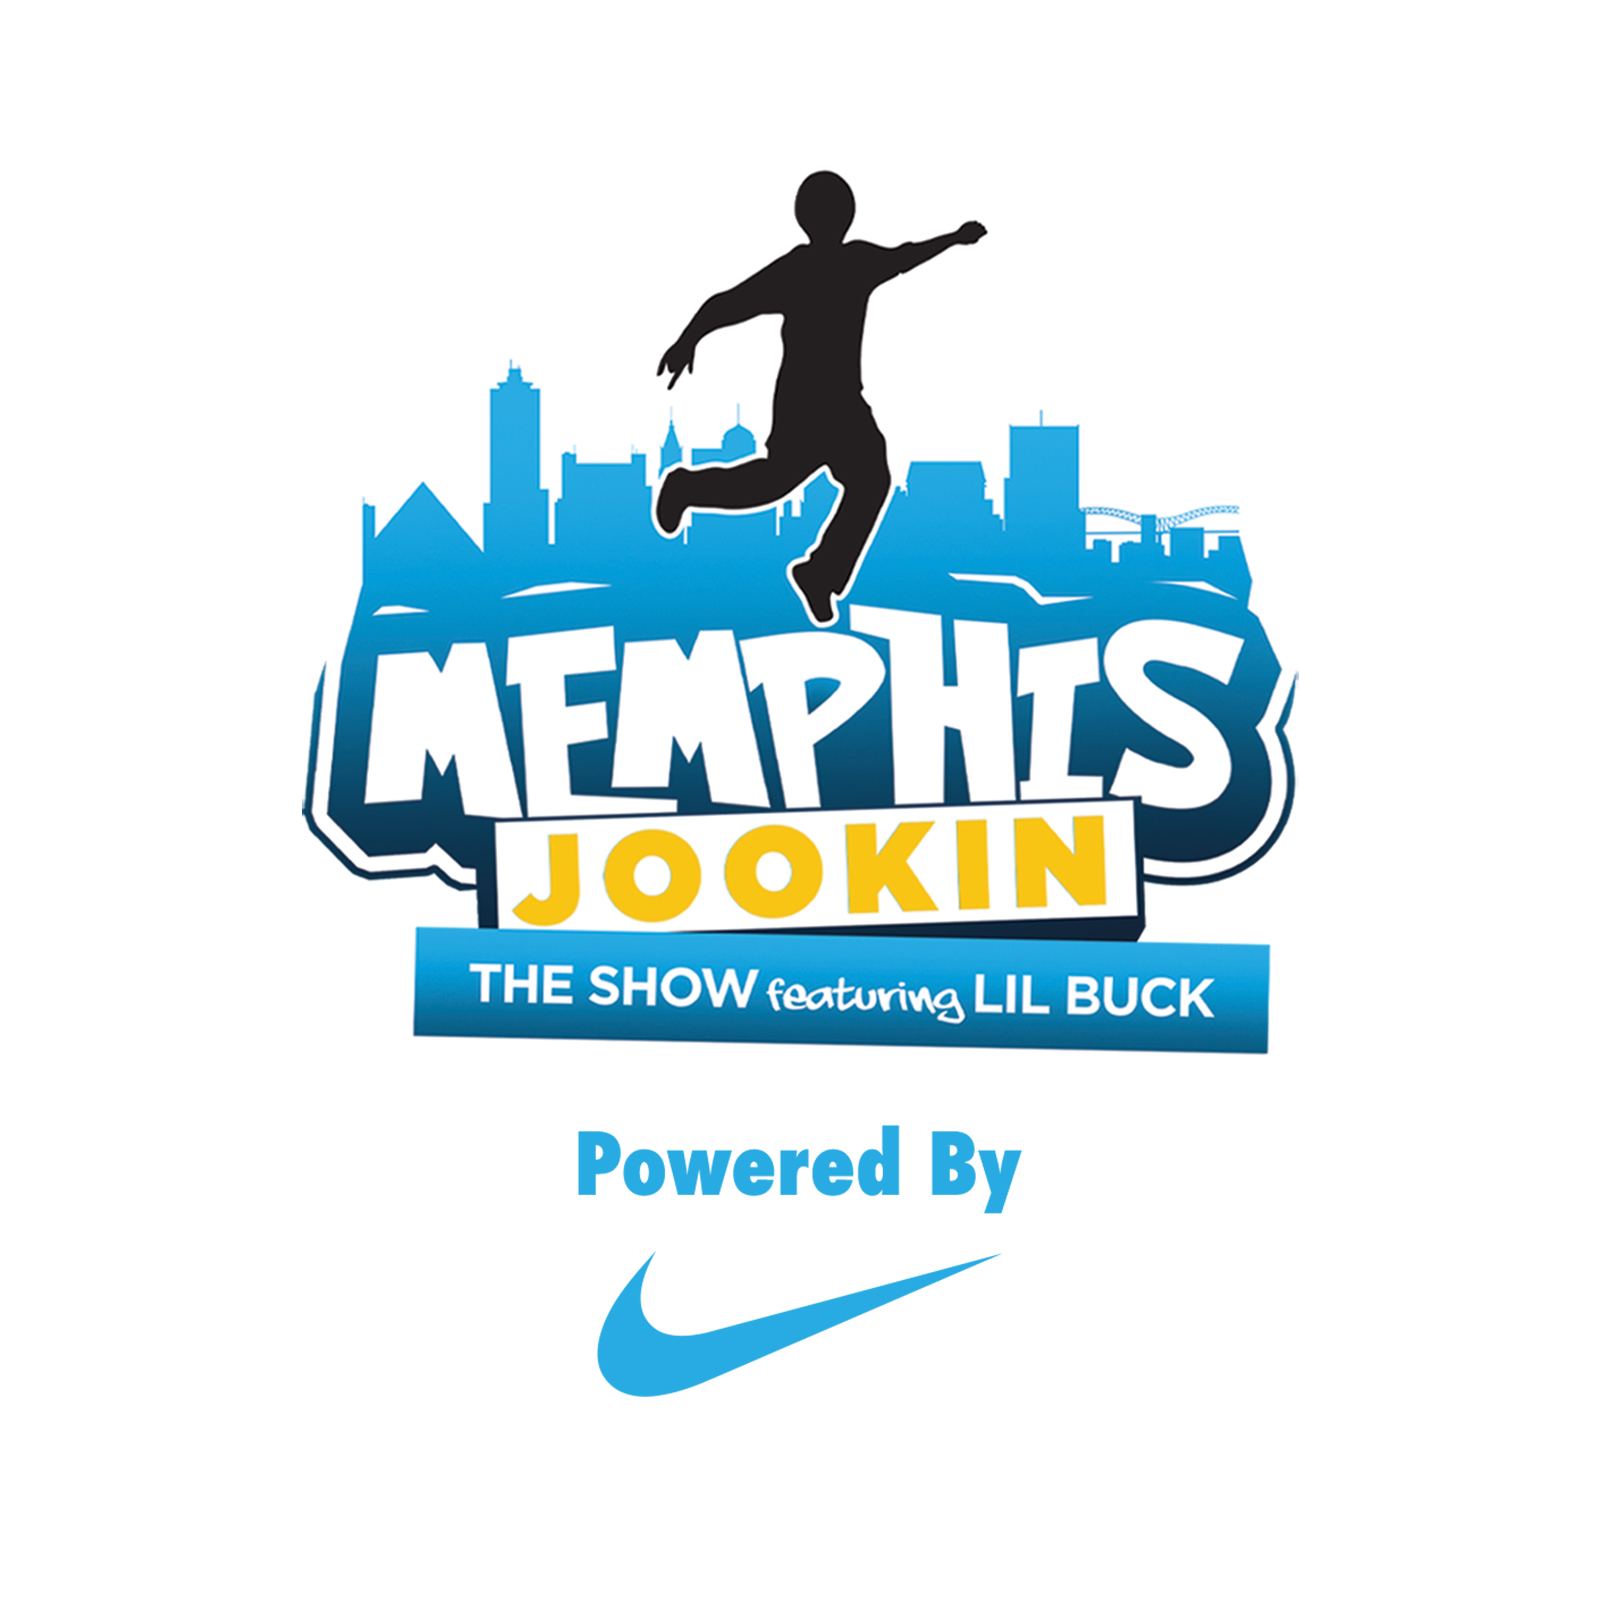 Memphis Joking' The Show Featuring Lil Buck Powered by Nike logo (dancing silhouette against a city skyline)